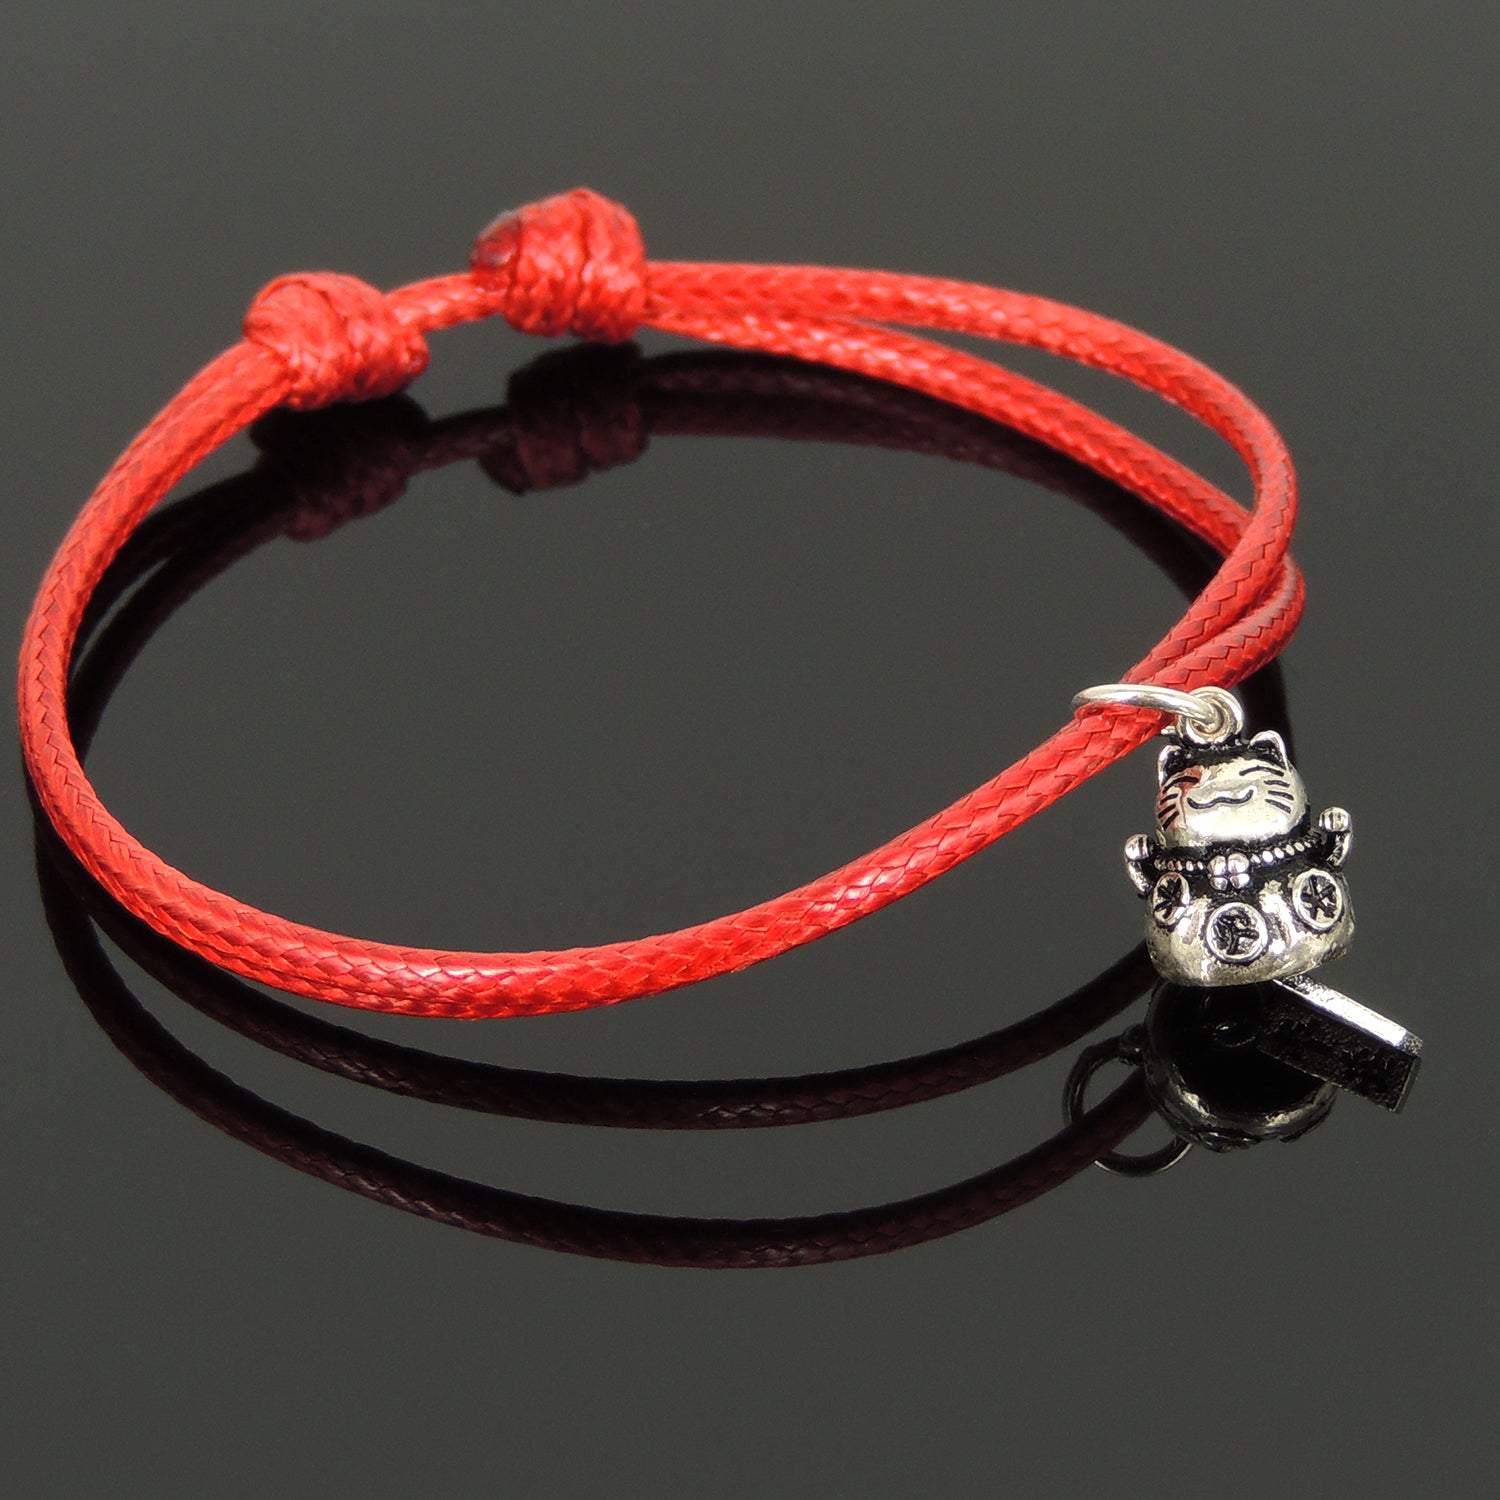 Maneki Neko Charm/Pendant, "Lucky Cat", Bright Red Wax Rope Bracelet with Genuine 925 Sterling Silver Chinese Calligraphy Scrolls - Blessing, Wealth, and Protection